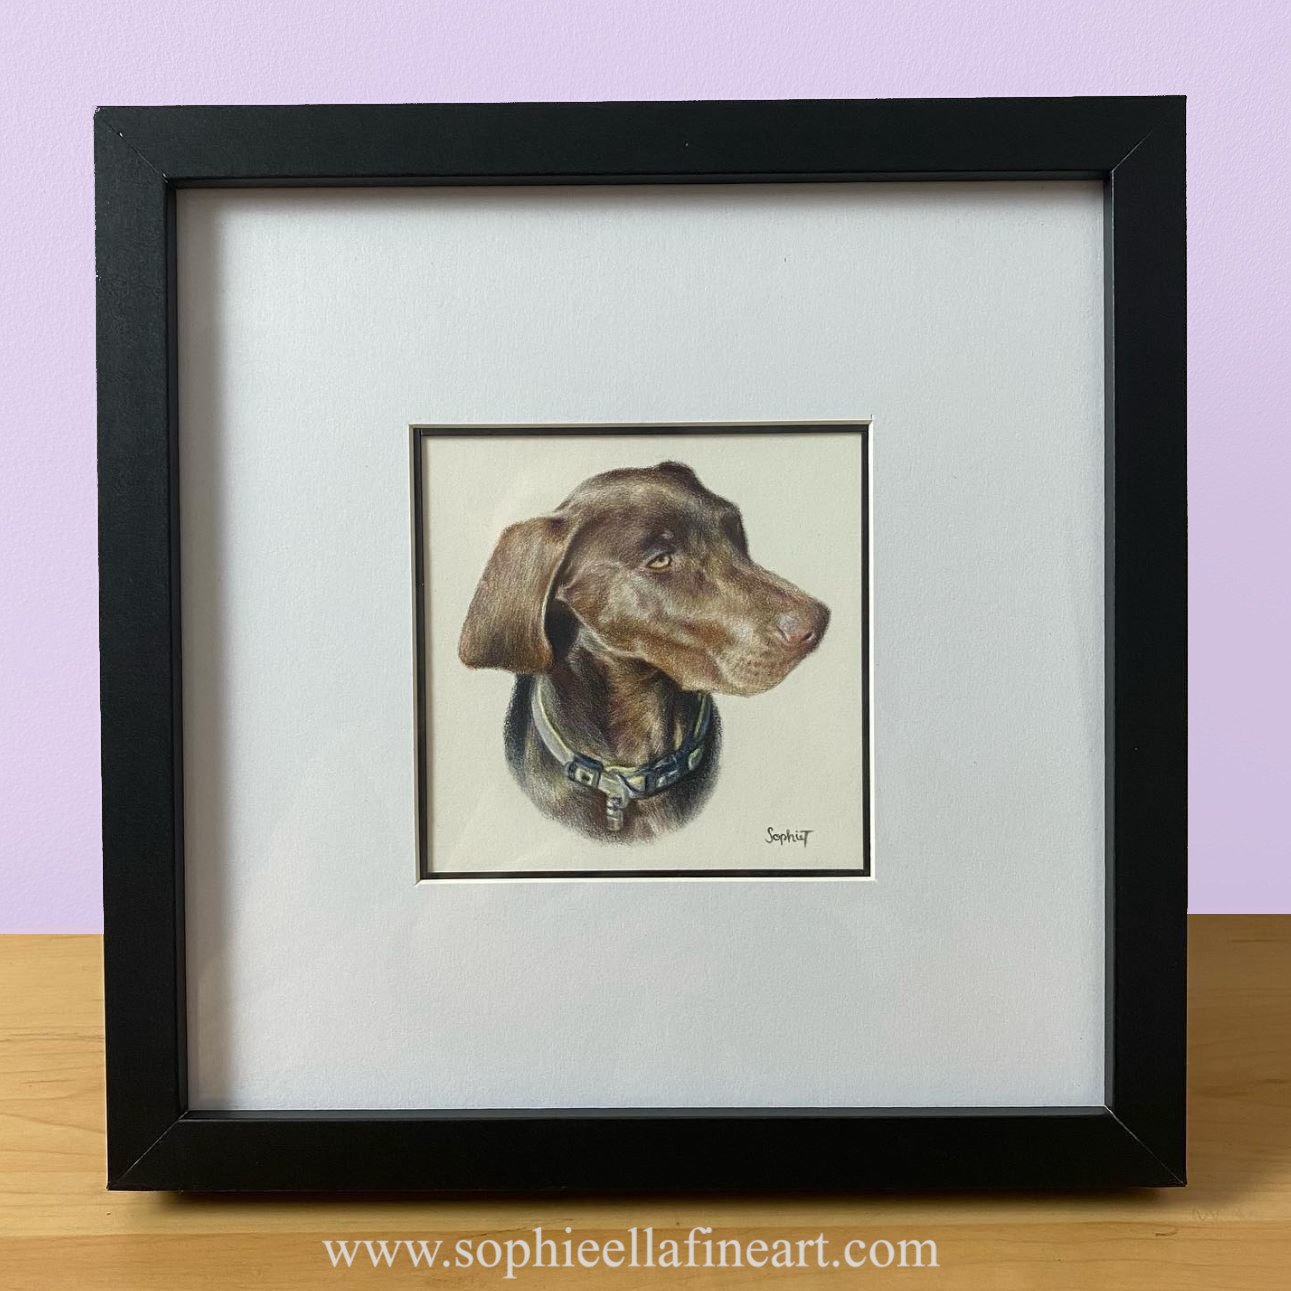 A 4x4 mini pet portrait of a dog in a black frame on a wooden shelf in front of a purple background